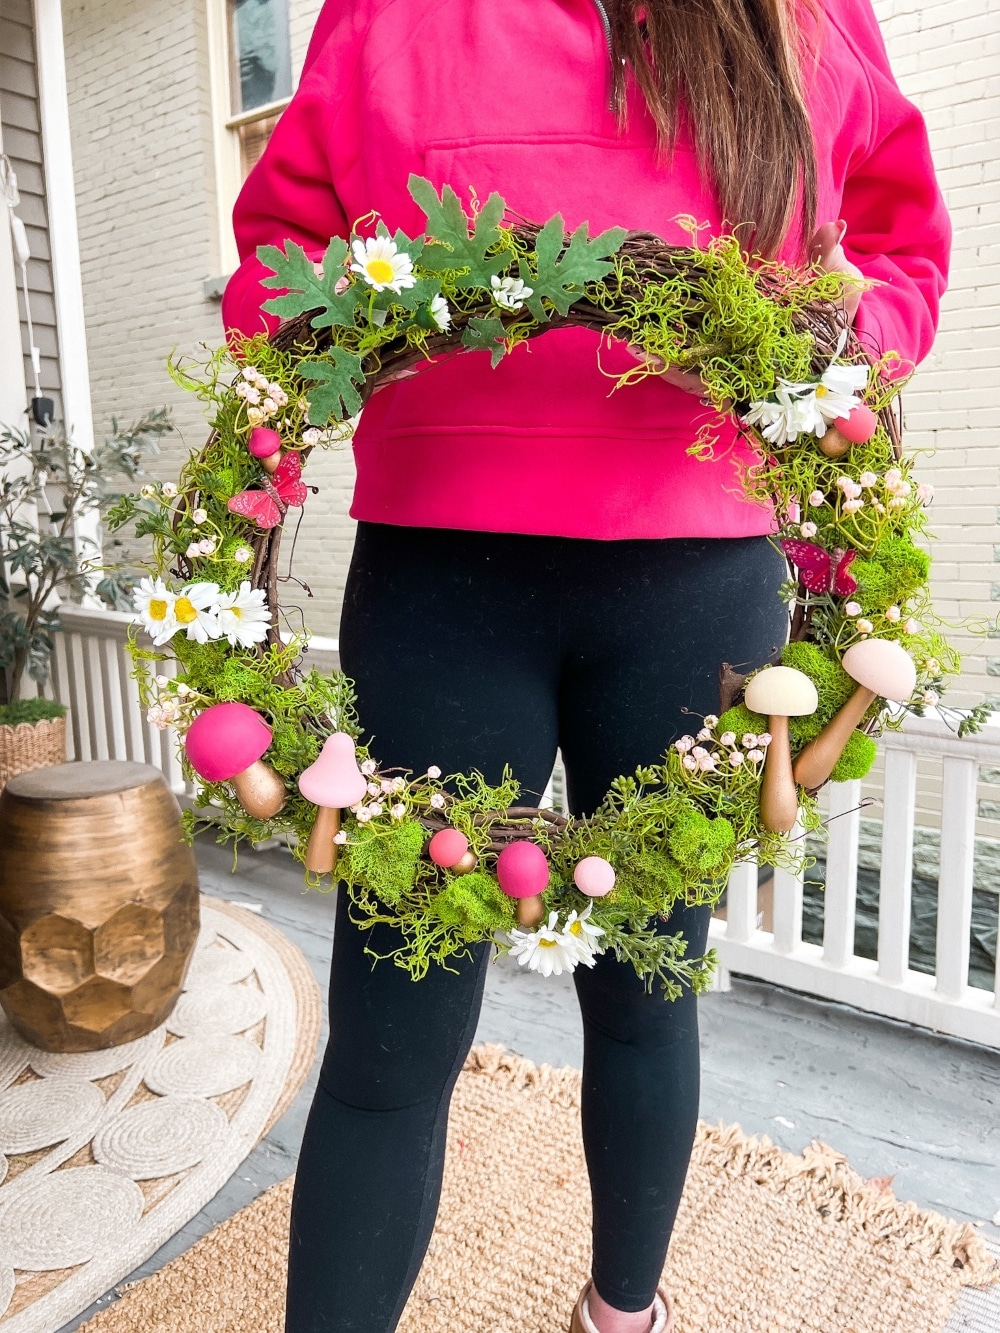 Spring Mushroom and Moss Wreath. Celebrate Spring by making this DIY wreath with wooden mushrooms, butterflies and moss!